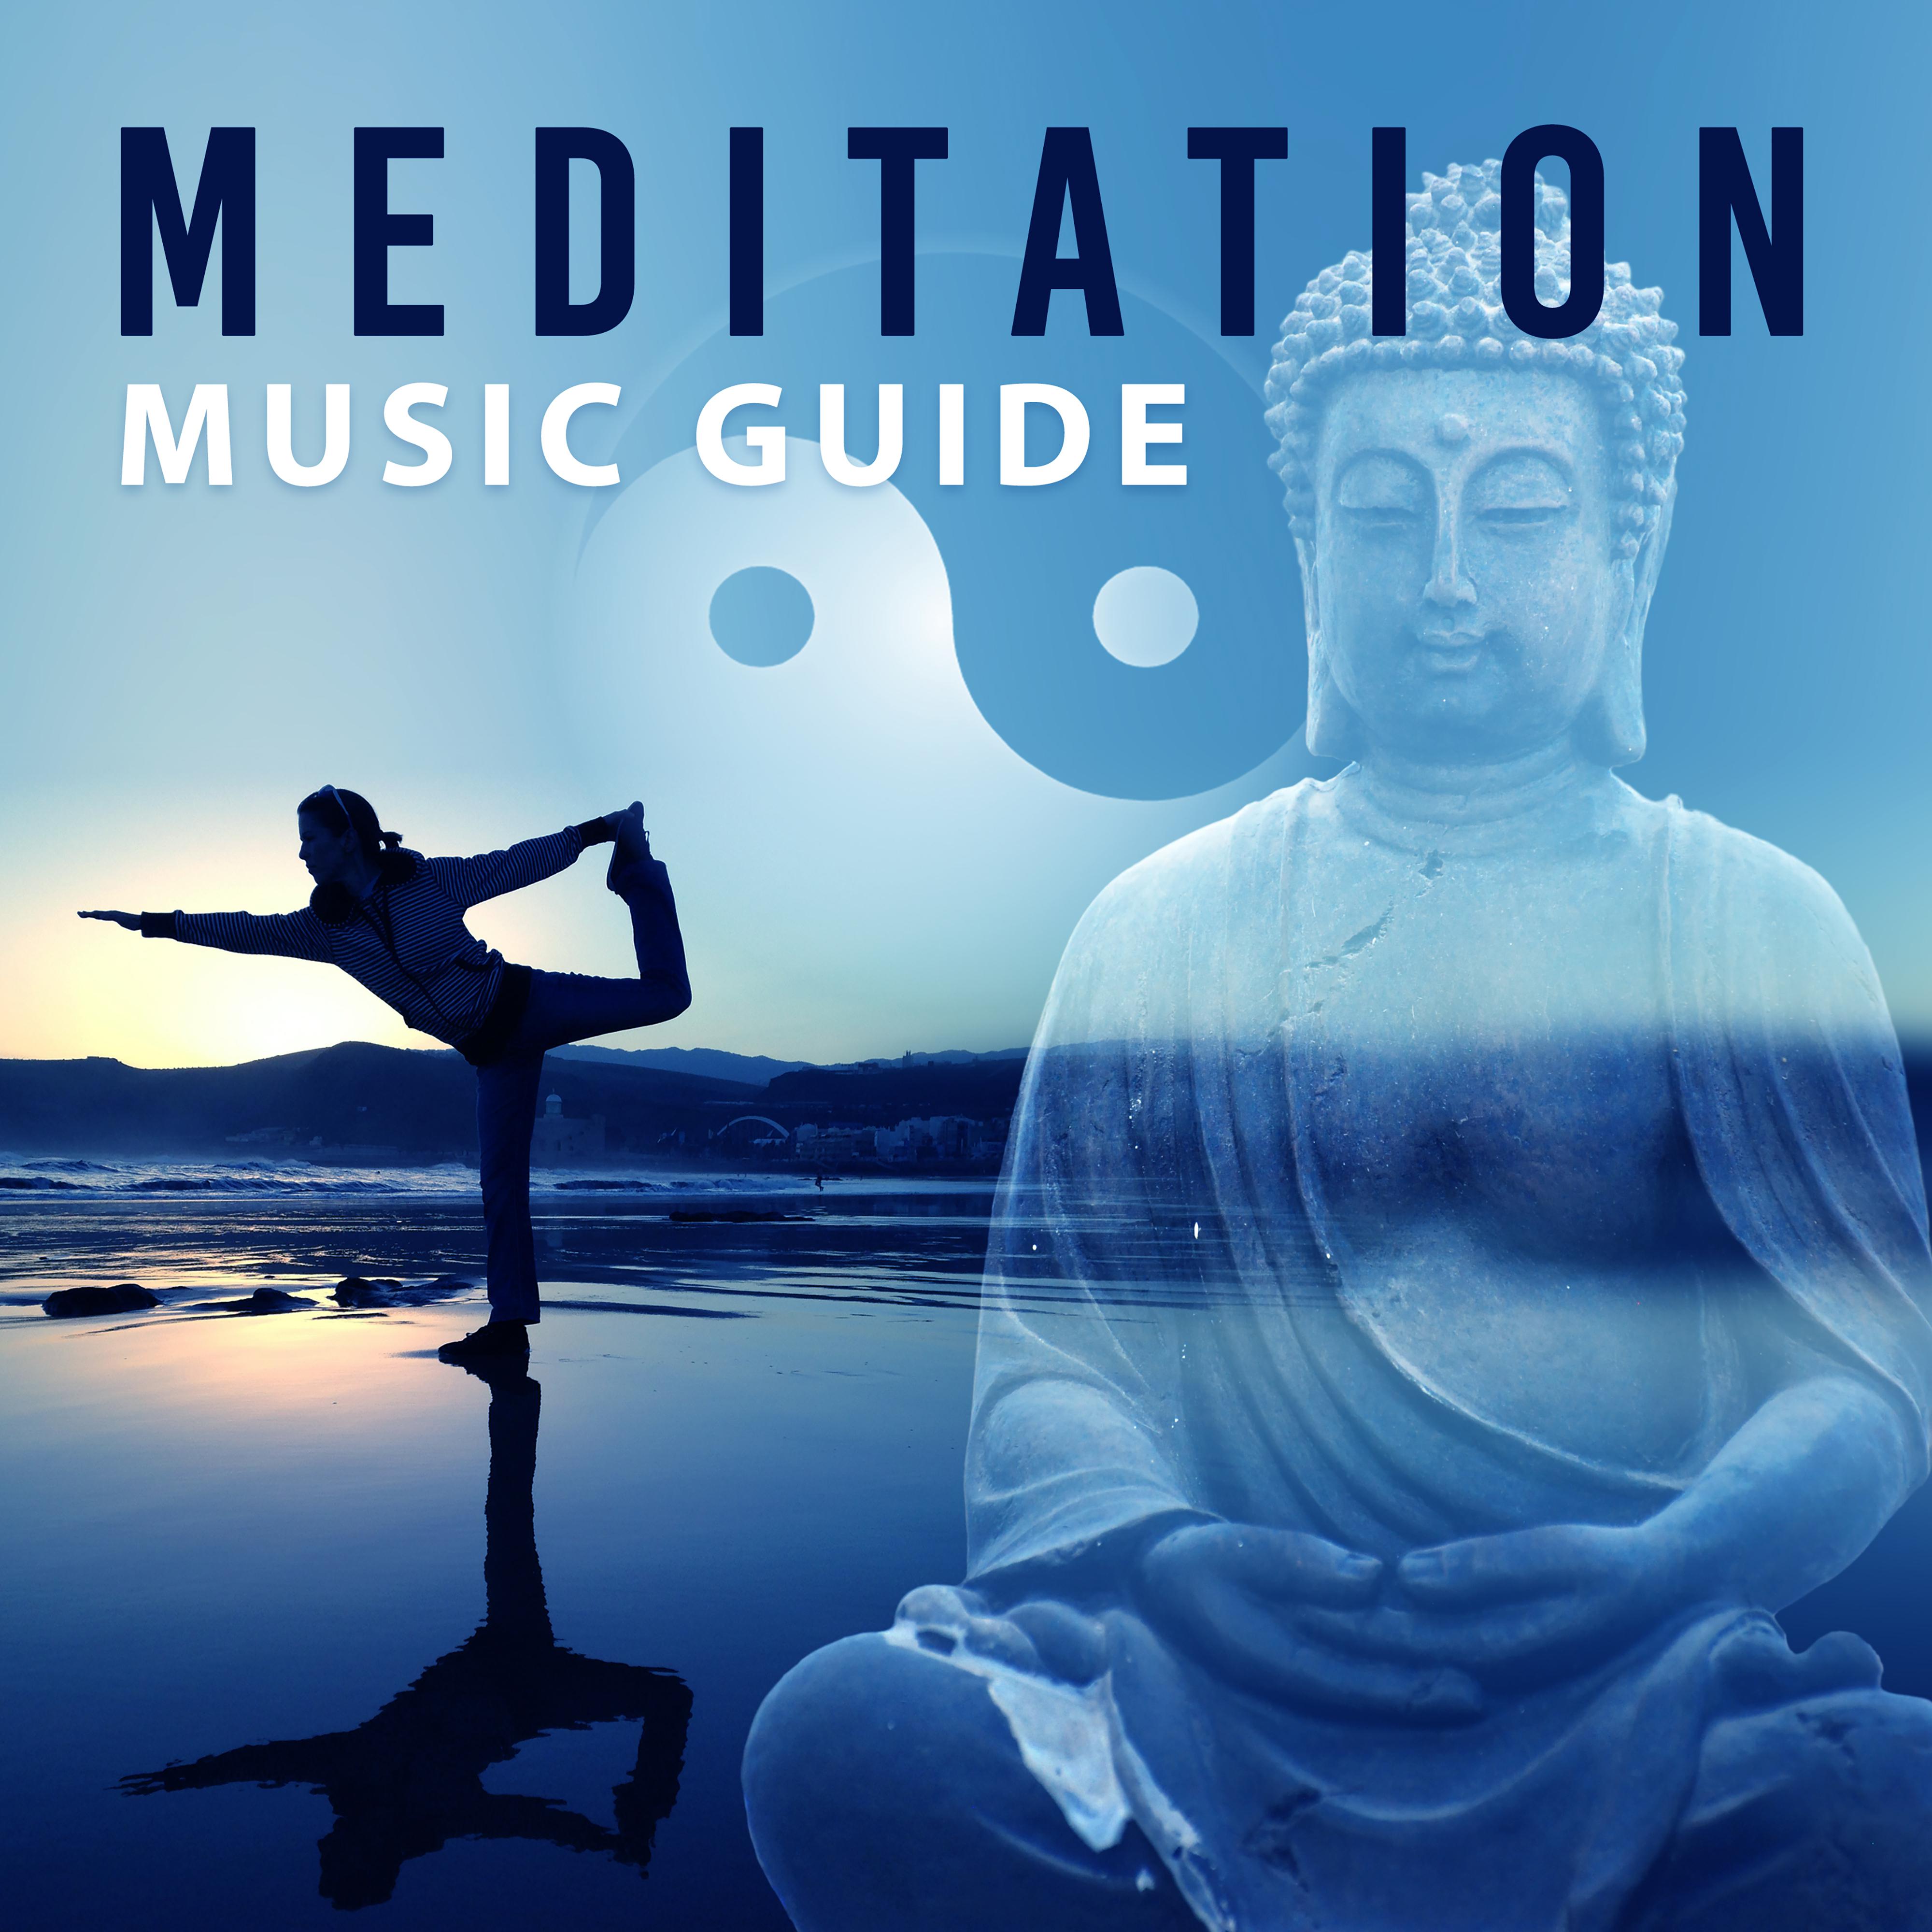 Meditation Music Guide  Soft New Age Music, Relaxing Sounds to Calm Down, Spirit Free, Inner Silence